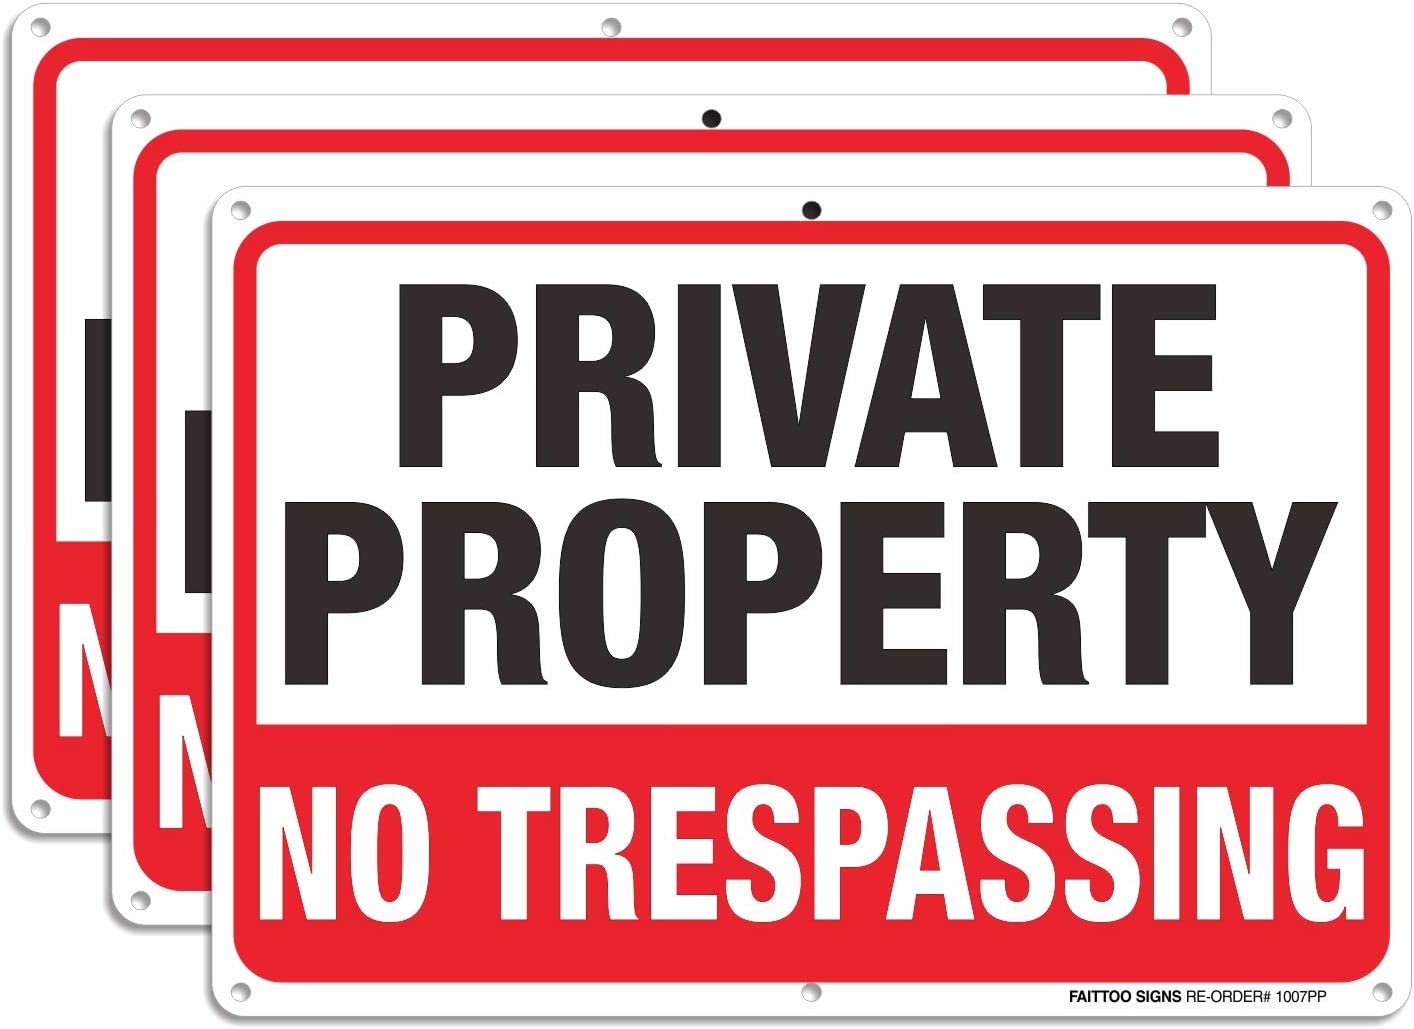 Private Property No Trespassing Metal Sign, 10 x 7 Inches Rust Free .040 Aluminum Sign – Reflective – Weatherproof - Easy to Mount - Indoor &amp; Outdoor use